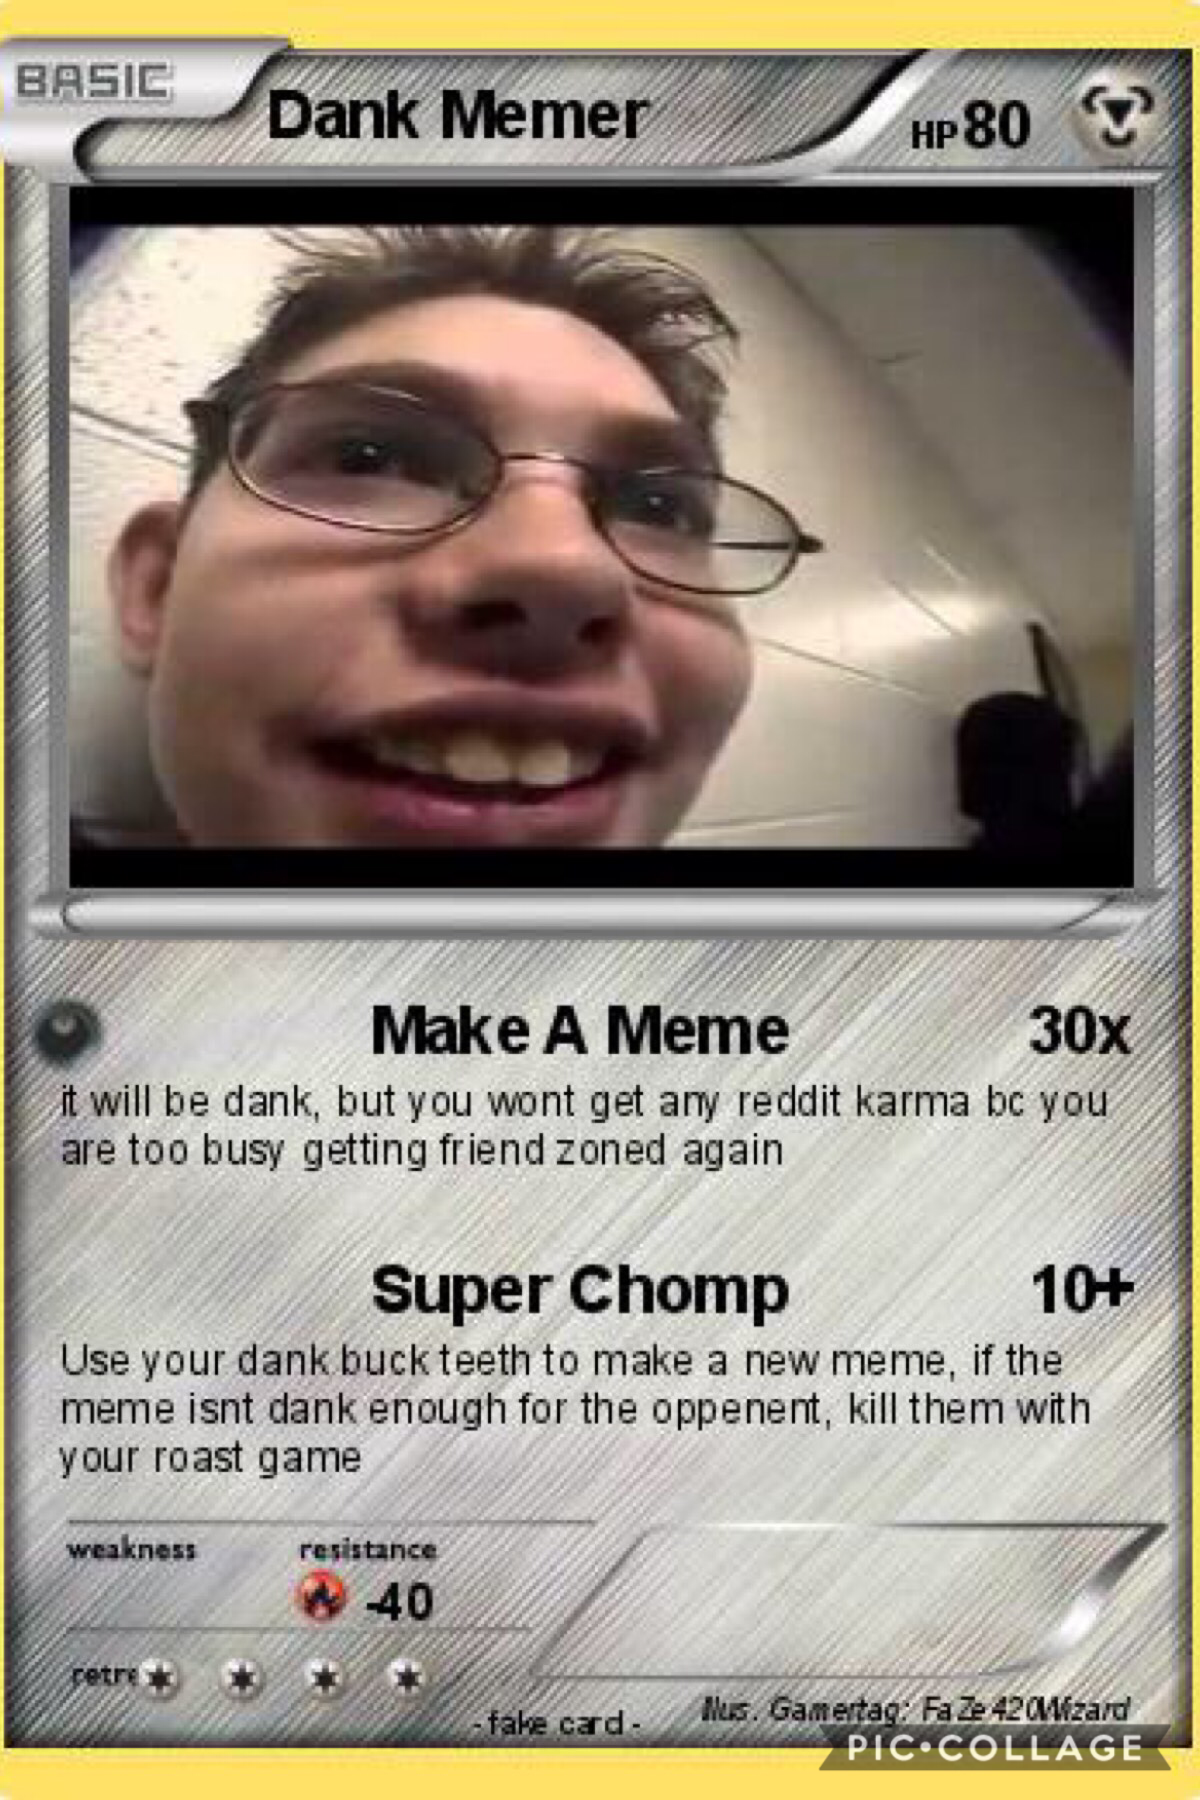 MOre dank meme gaming cards tO yeet peOple with were requested but I might nOt be able tO find a lOt. But I’ll try my best!